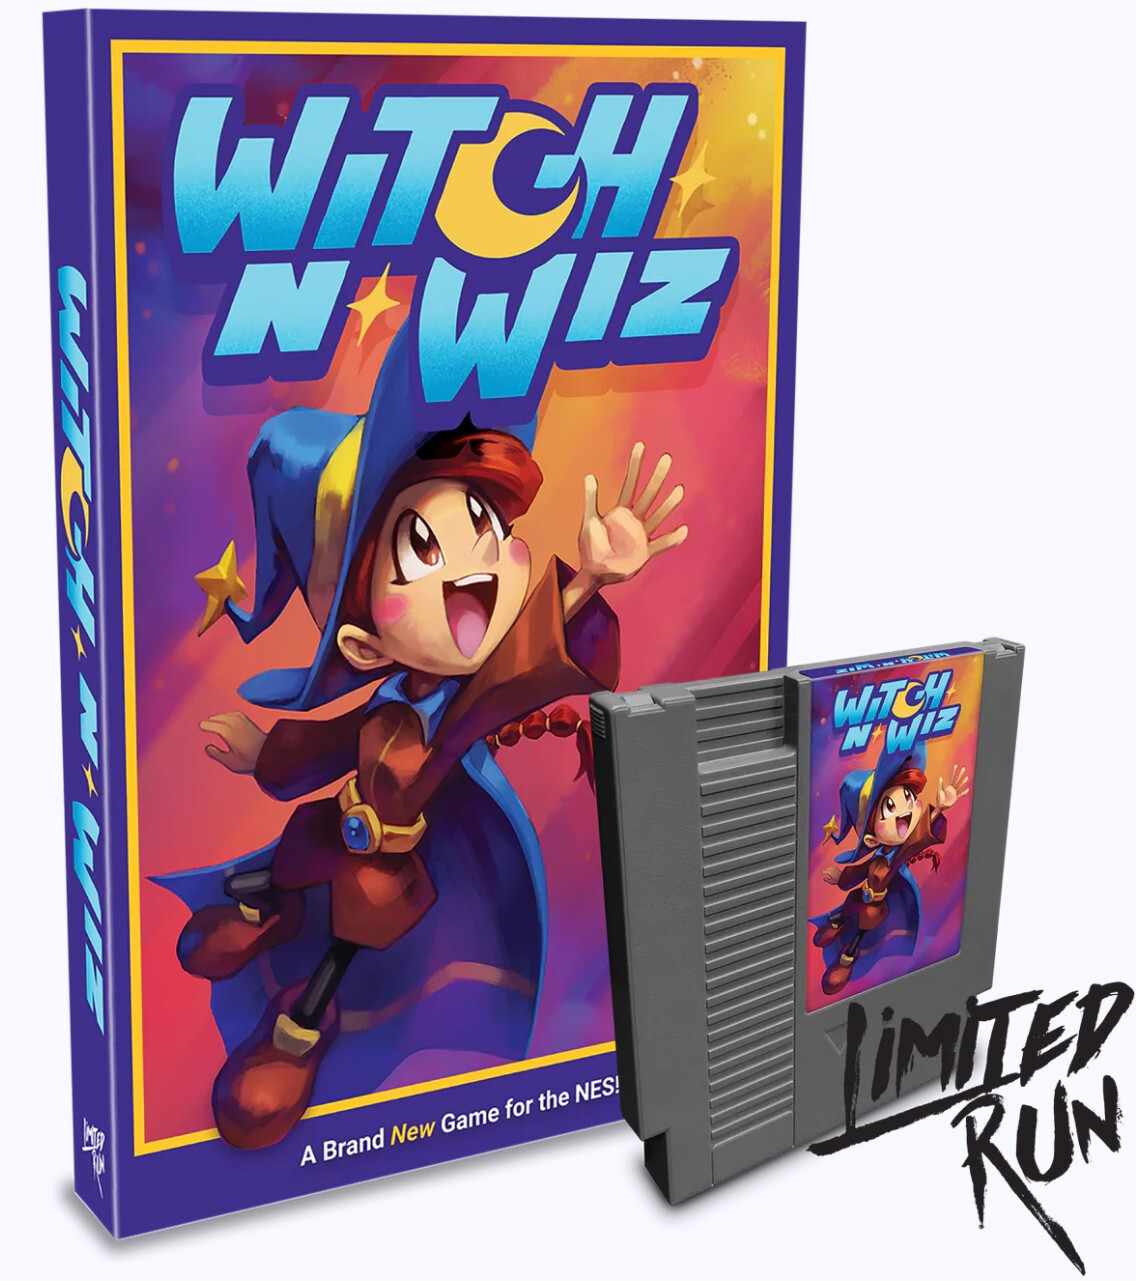 Limited Run Witch n' Wiz (Limited Run Games)